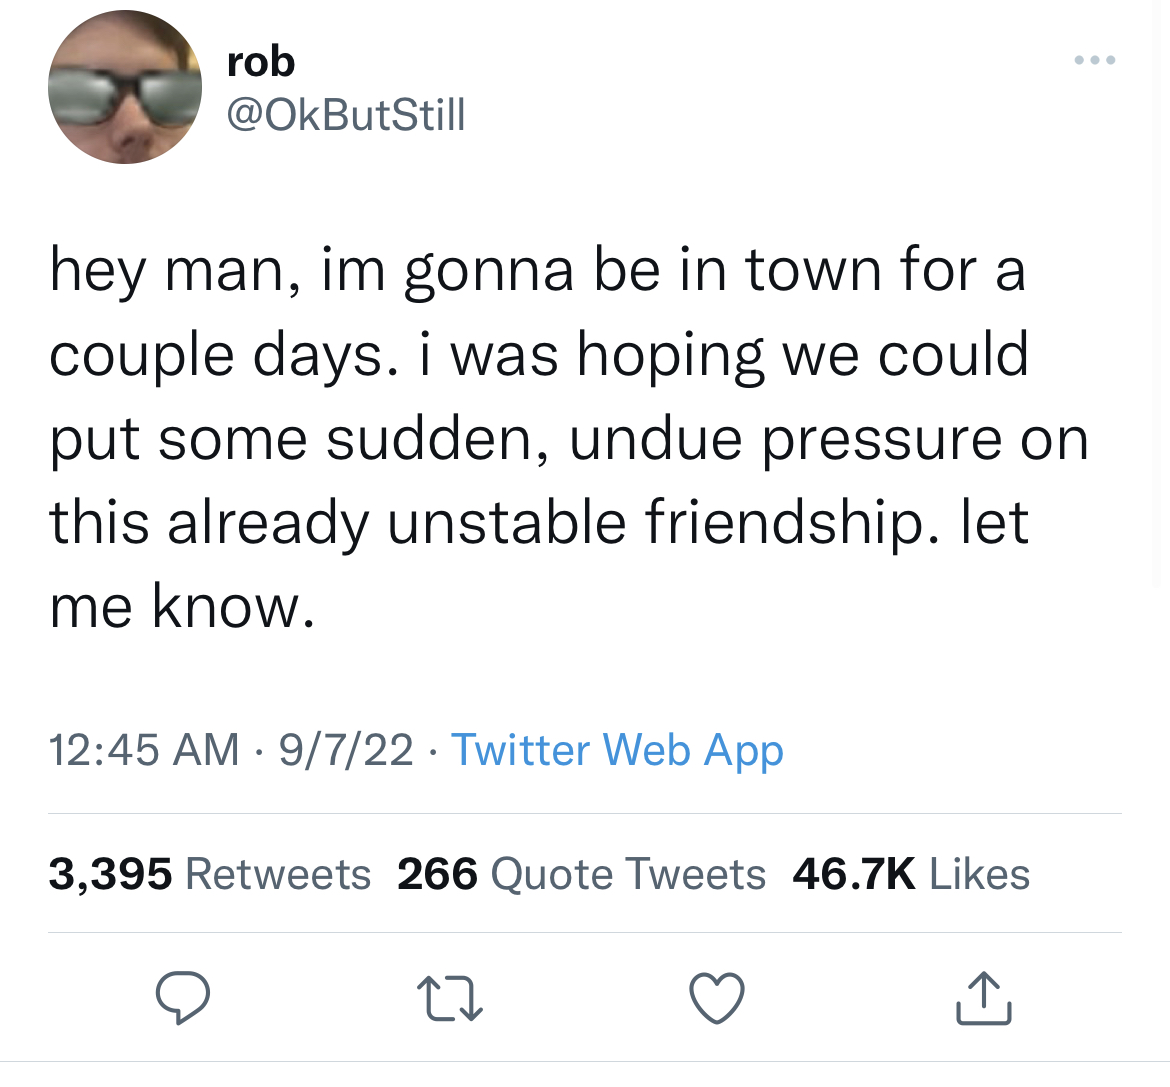 Fresh and funny tweets - tweets about graduation - rob hey man, im gonna be in town for a couple days. i was hoping we could put some sudden, undue pressure on this already unstable friendship. let me know. 9722 Twitter Web App 3,395 266 Quote Tweets 27